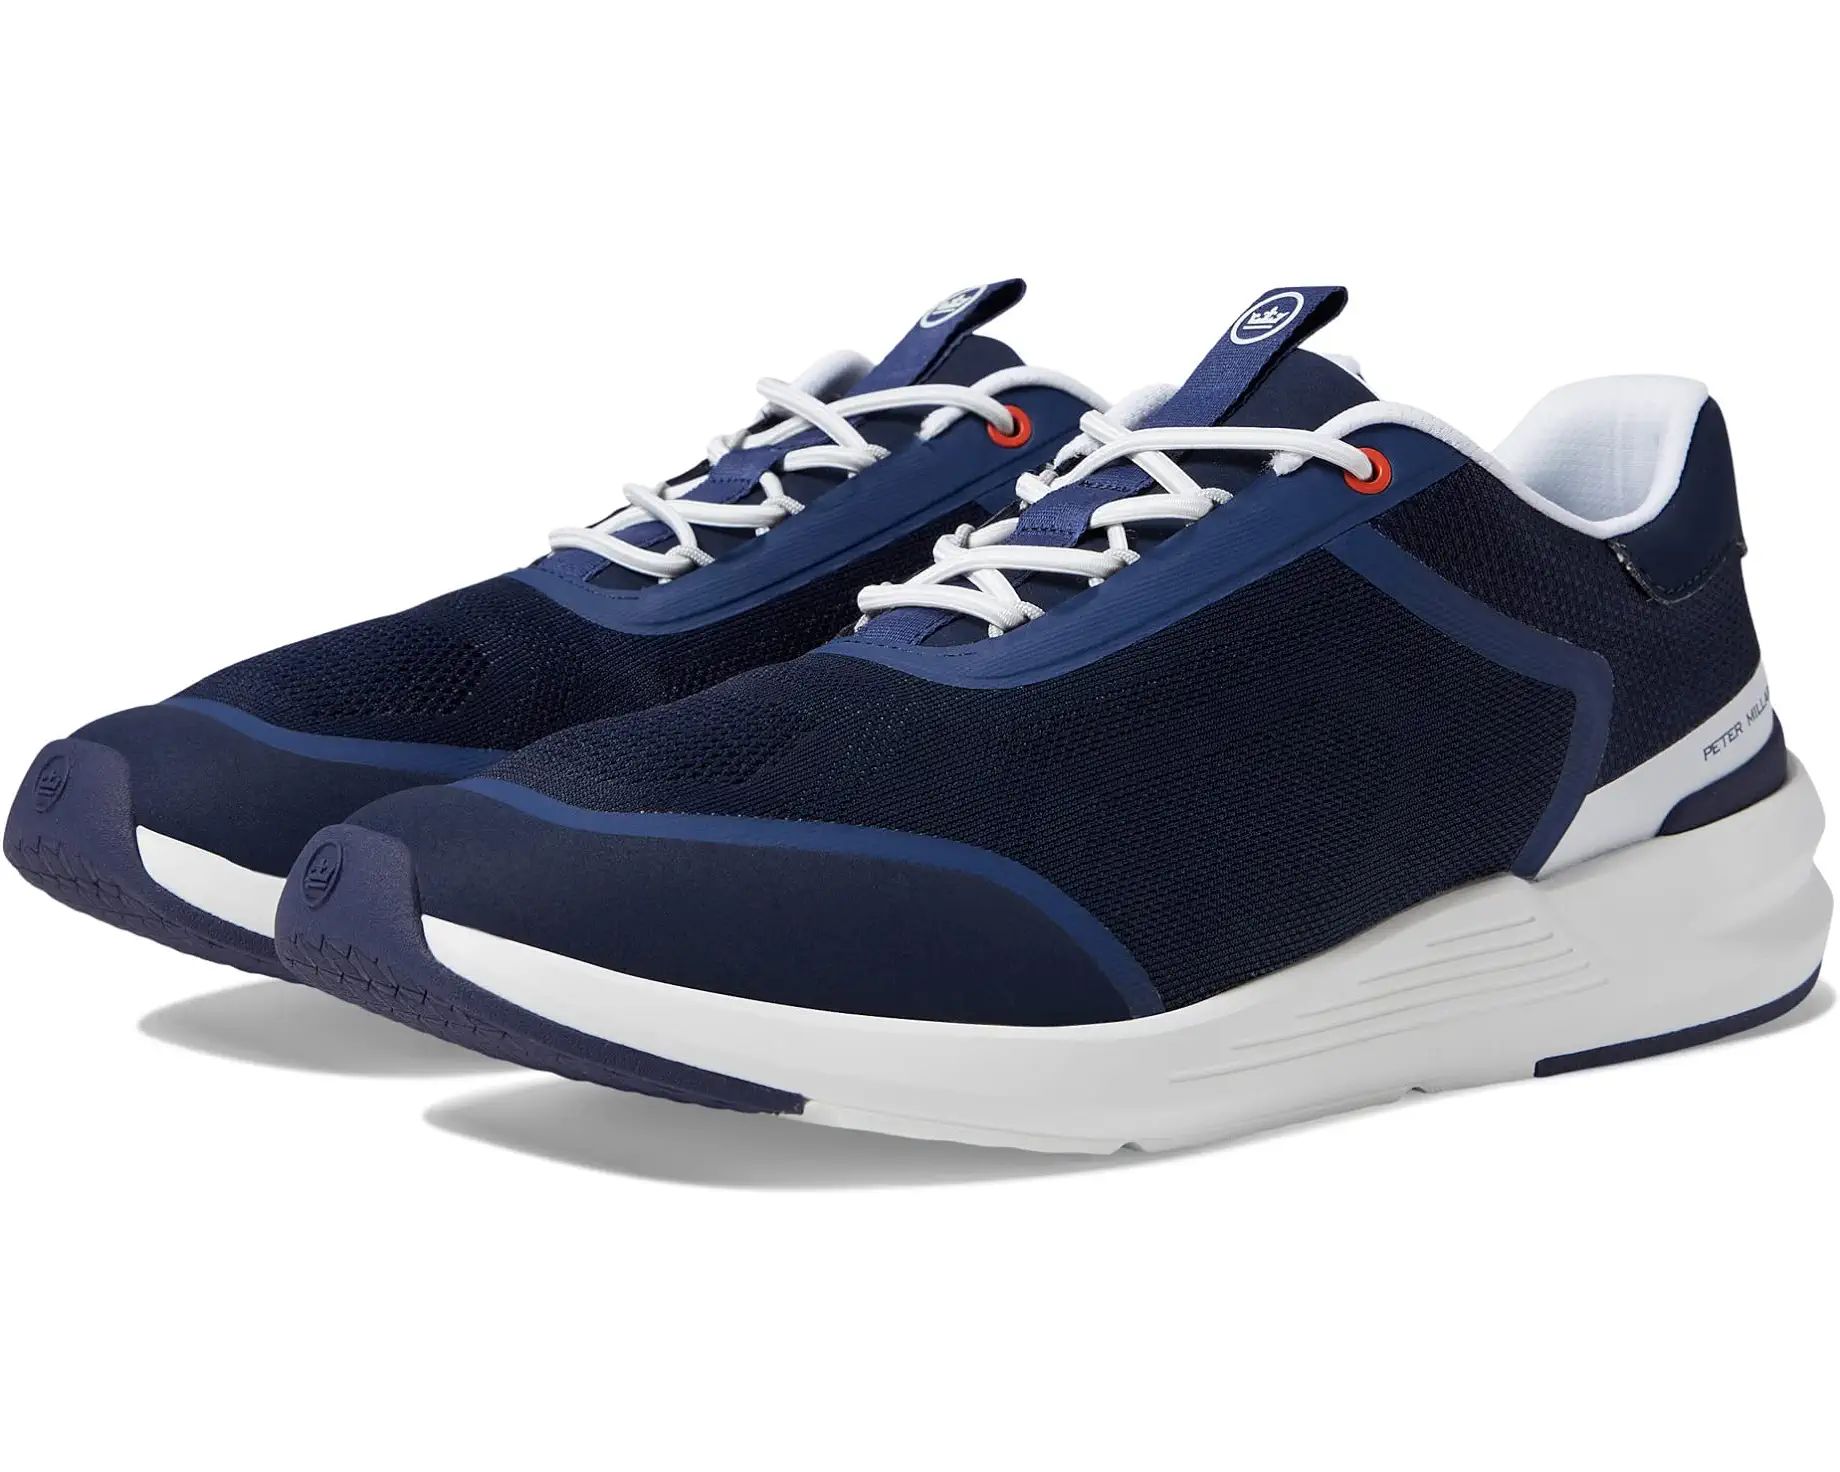 Peter Millar Camberfly Sneakers | Zappos